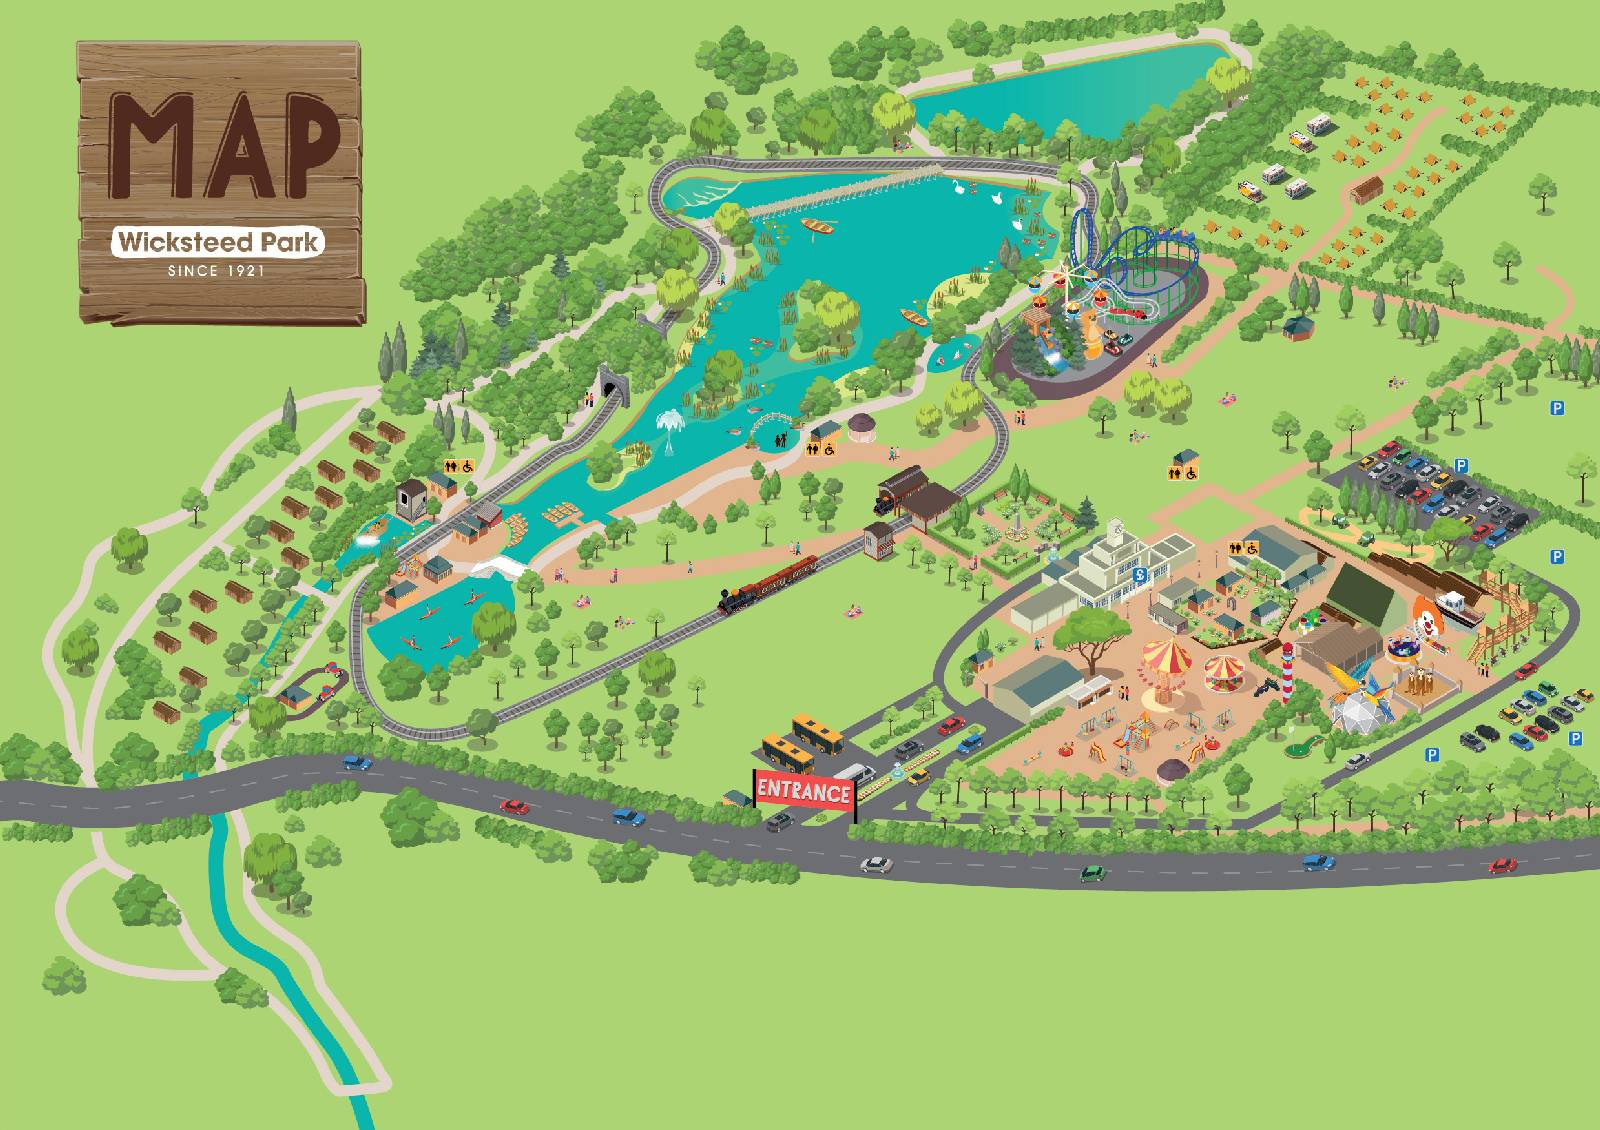 Map of Wicksteed Park